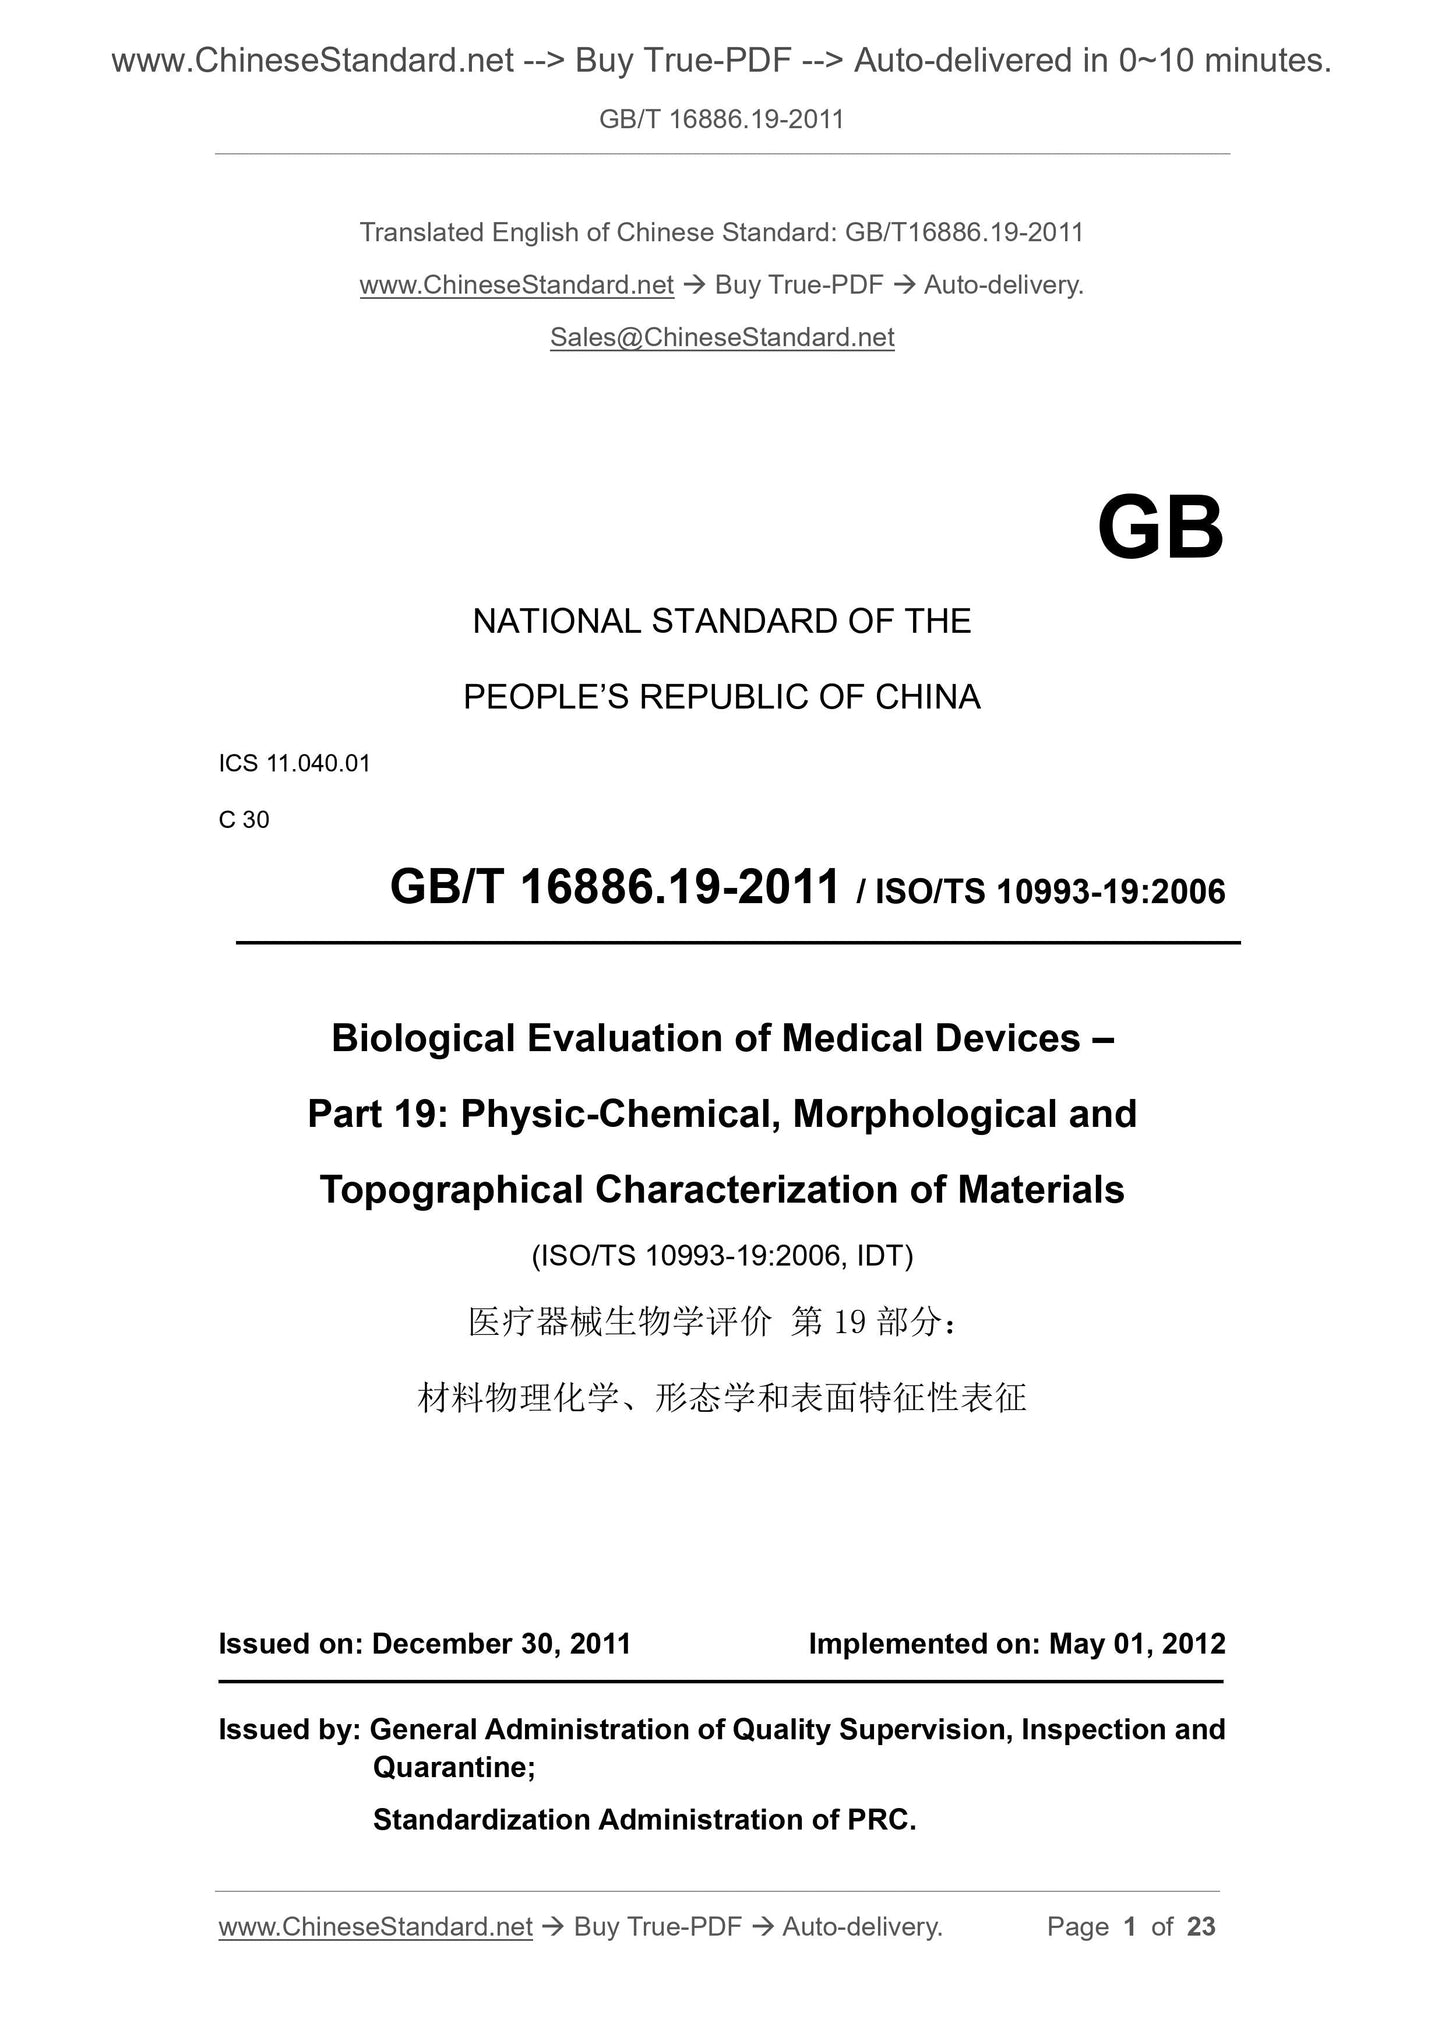 GB/T 16886.19-2011 Page 1